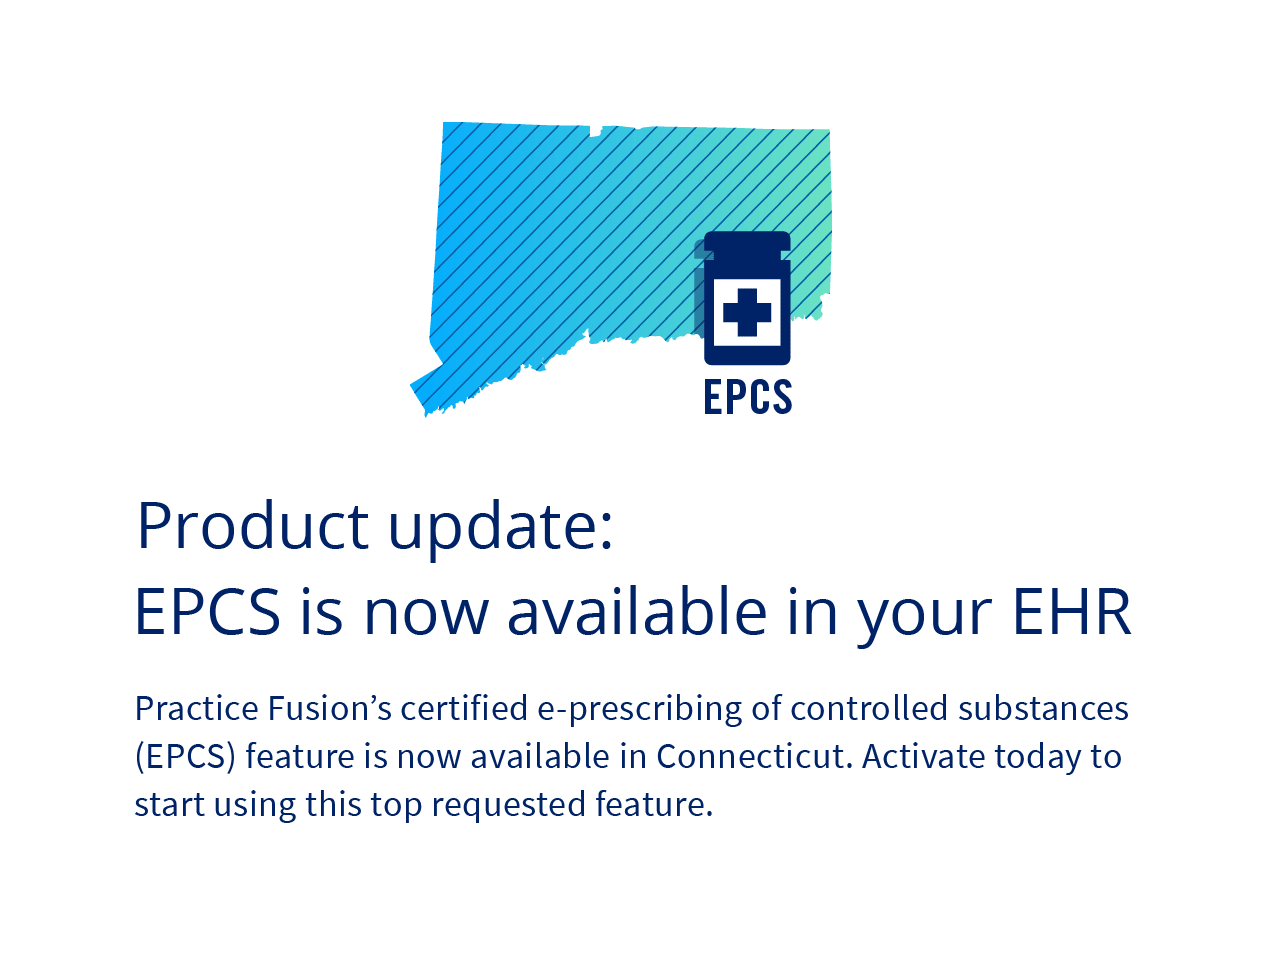 Product update: EPCS is now available in your EHR